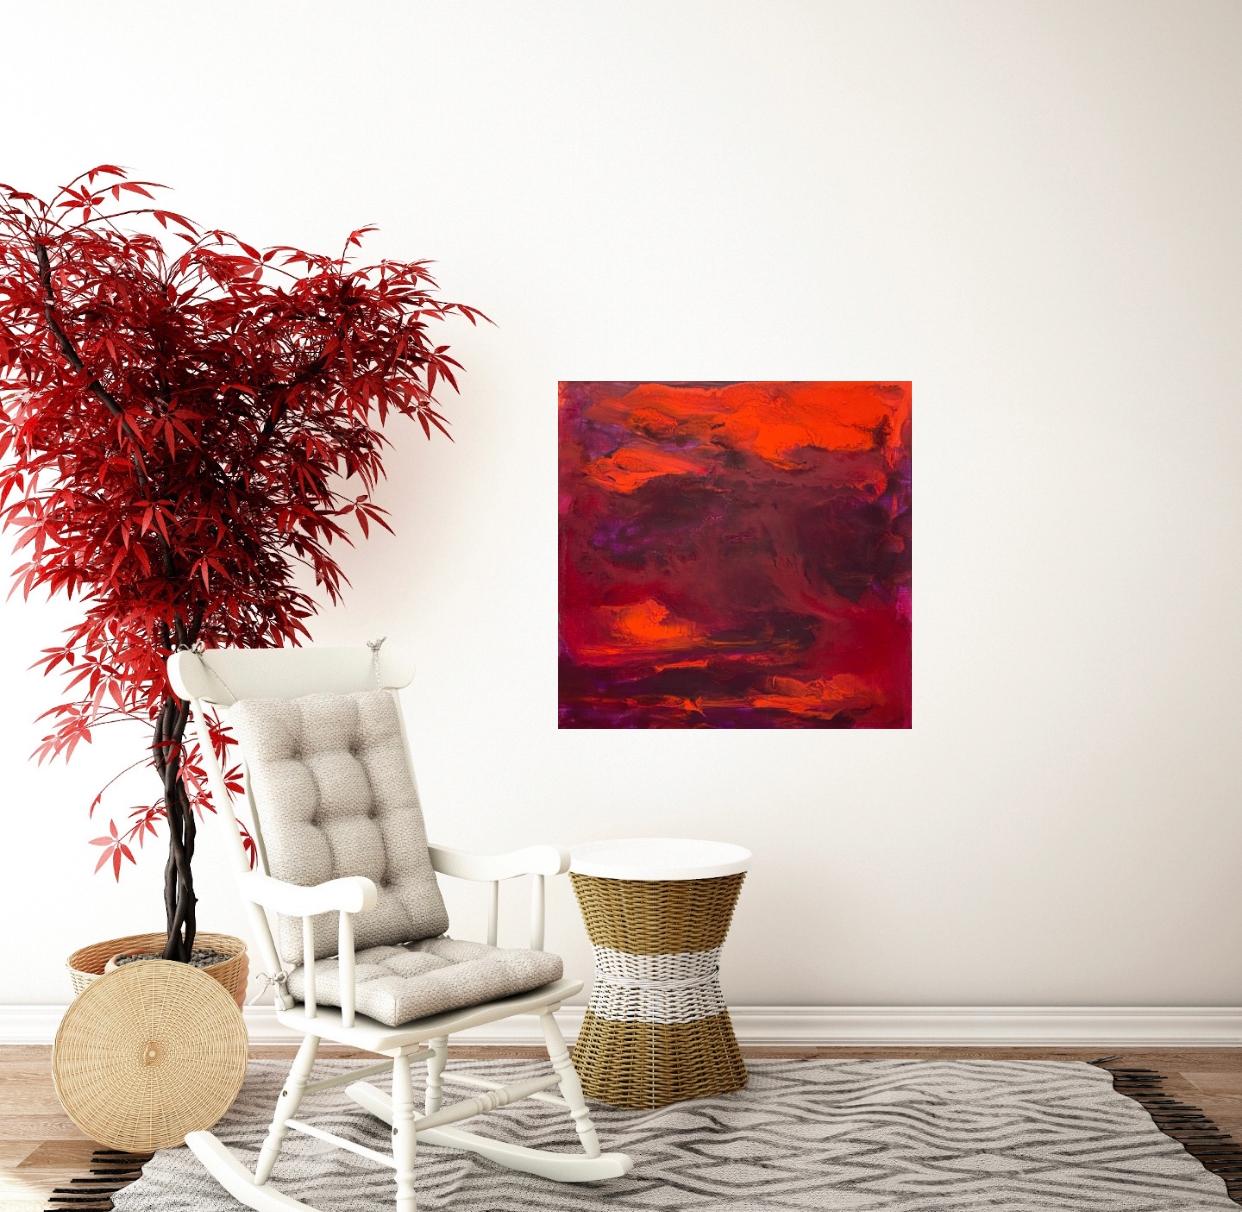 Sailor's delight, Contemporary painting with bold reds, oranges and violets 9